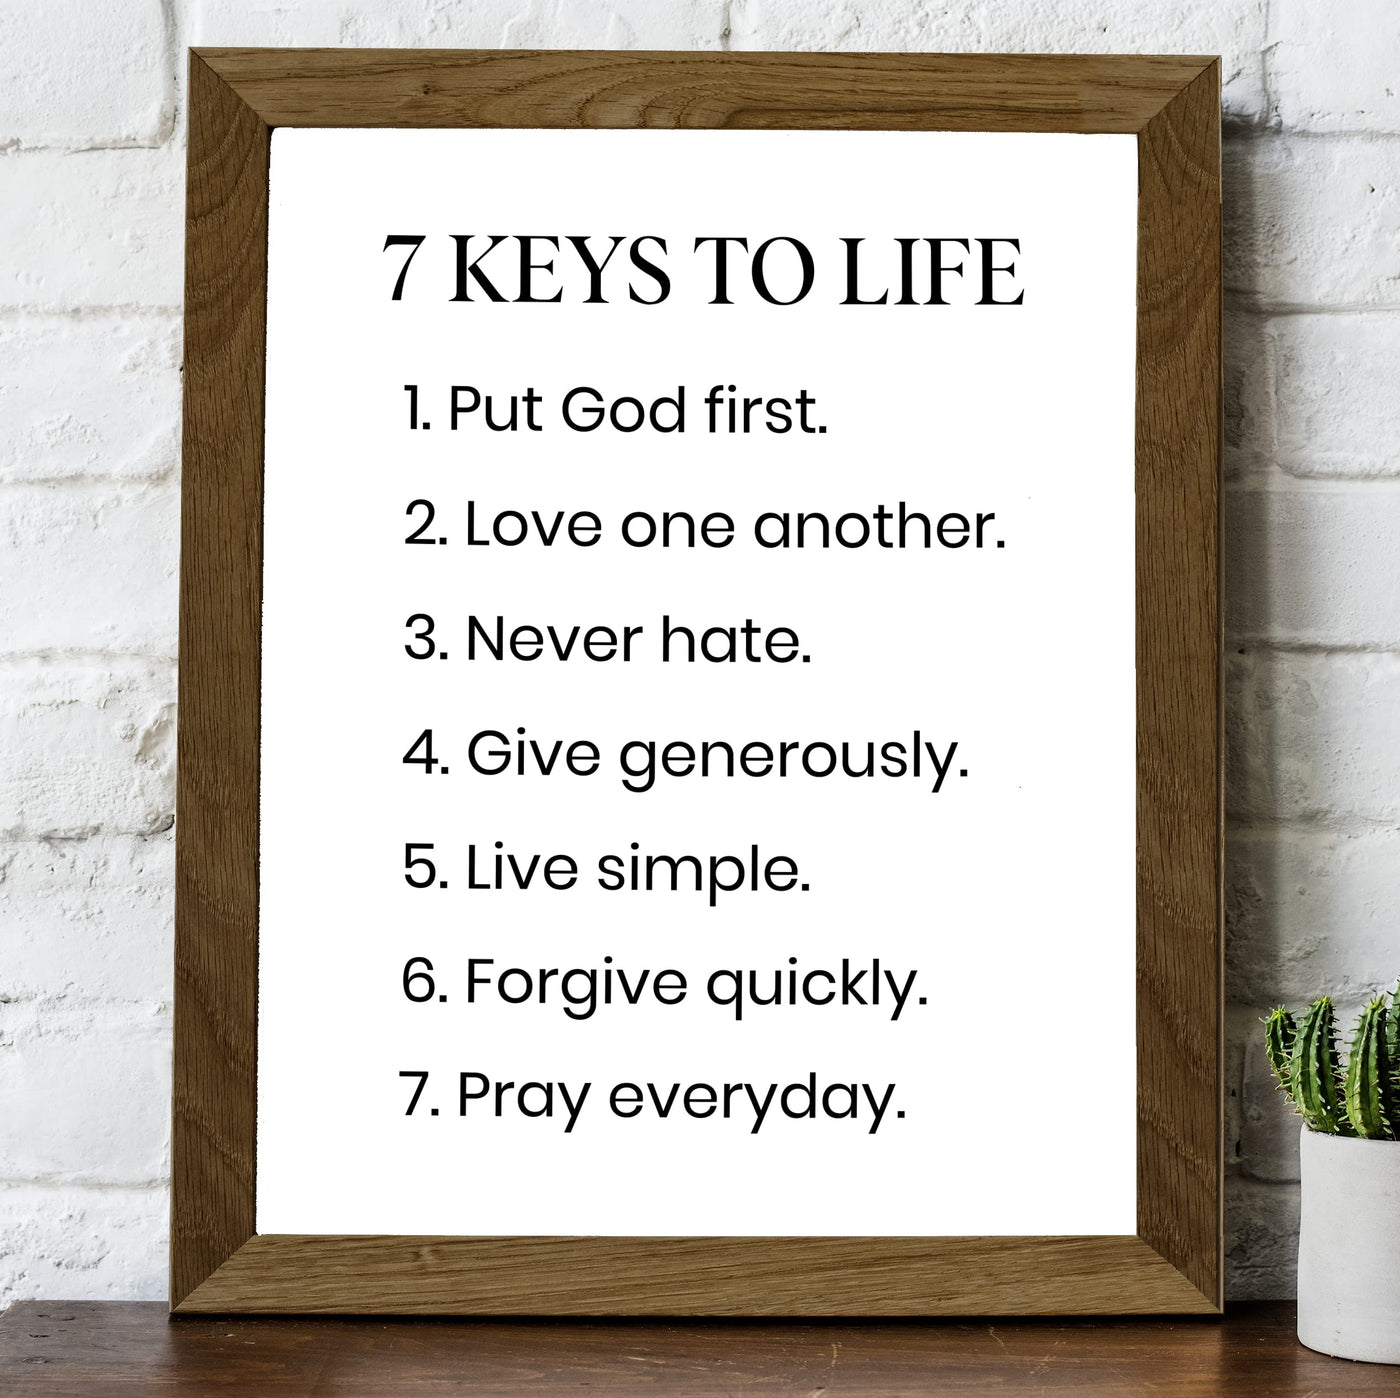 7 Keys to Life -Put God First Inspirational Quotes Wall Sign -8 x 10" Motivational Christian Poster Print -Ready to Frame. Positive Home-Office-Classroom-Church Decor. Perfect Life Lessons for All!